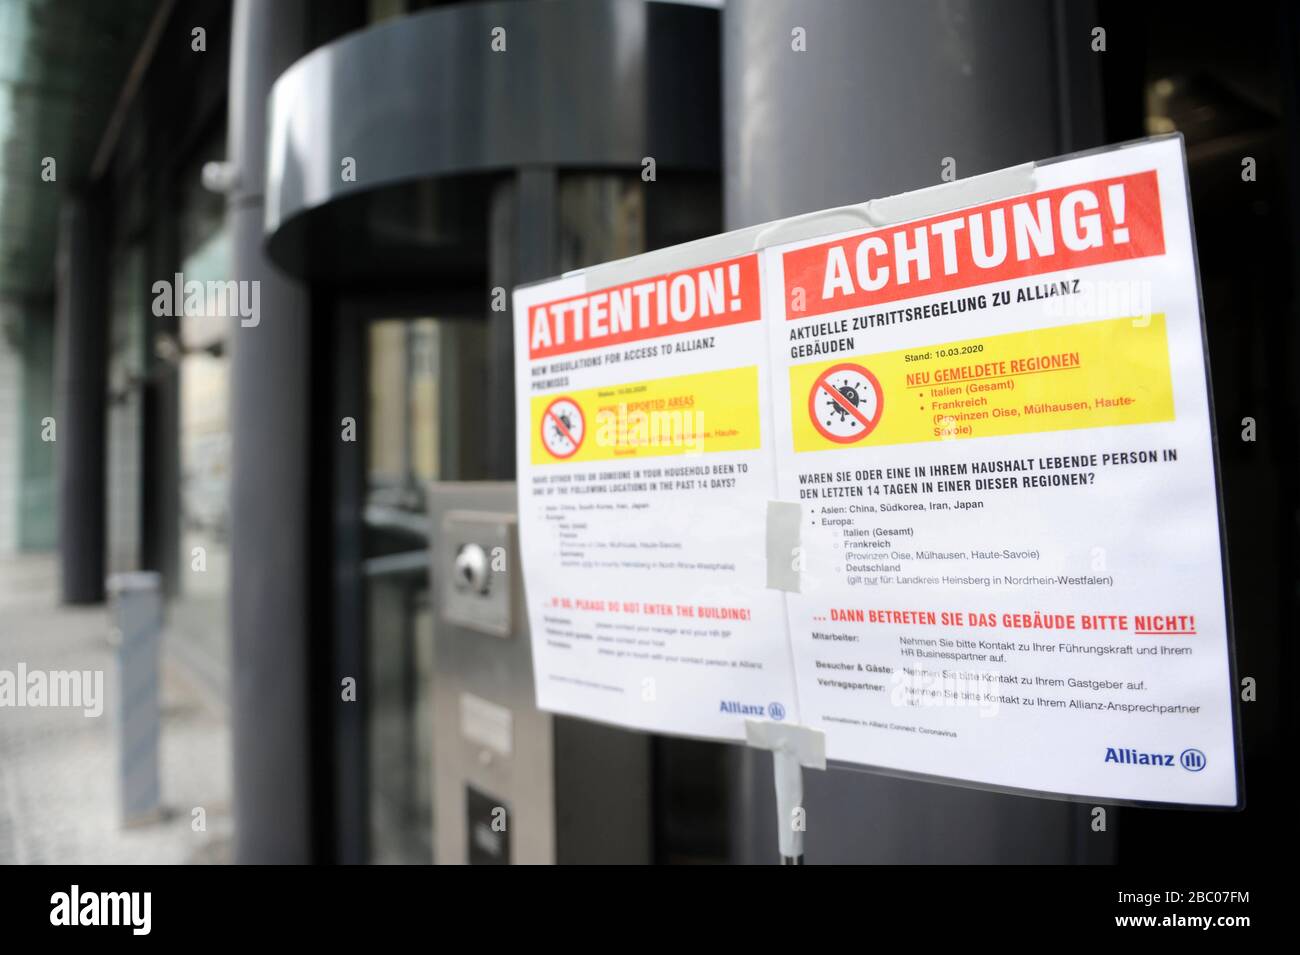 Effects of the corona virus: Munich's inner city is empty. Here is a sign that contains information about the corona virus. [automated translation] Stock Photo